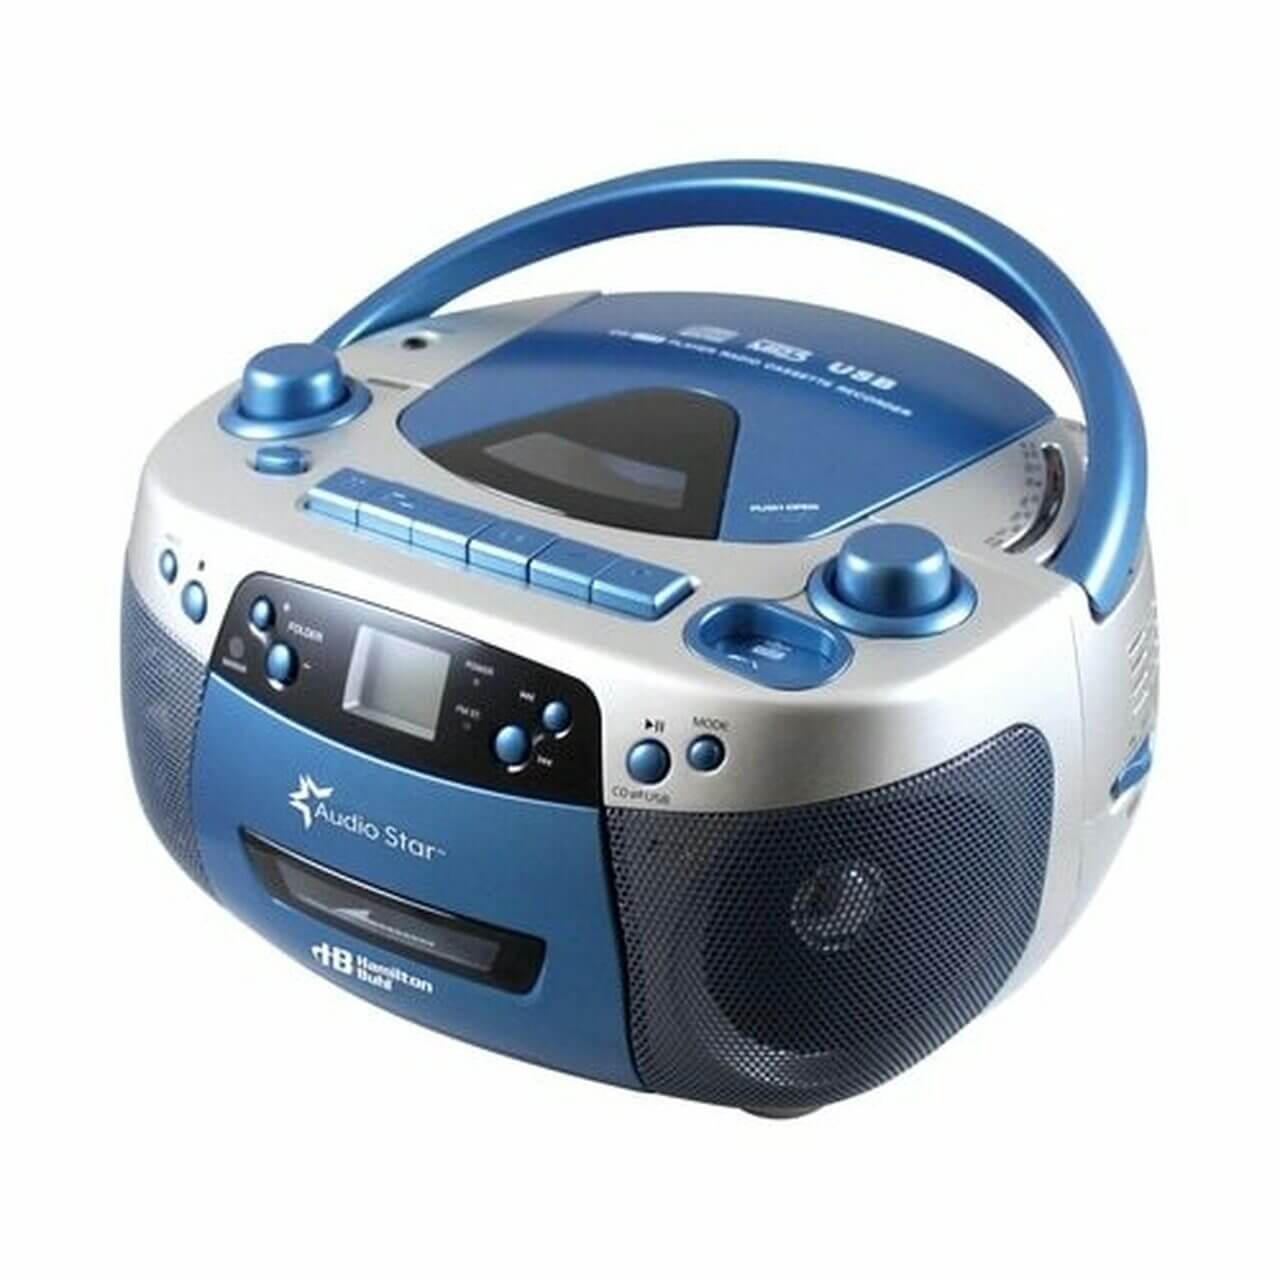 AudioStar Boombox Radio, CD, USB, Cassette Player with Tape and CD to MP3 Converter - Learning Headphones